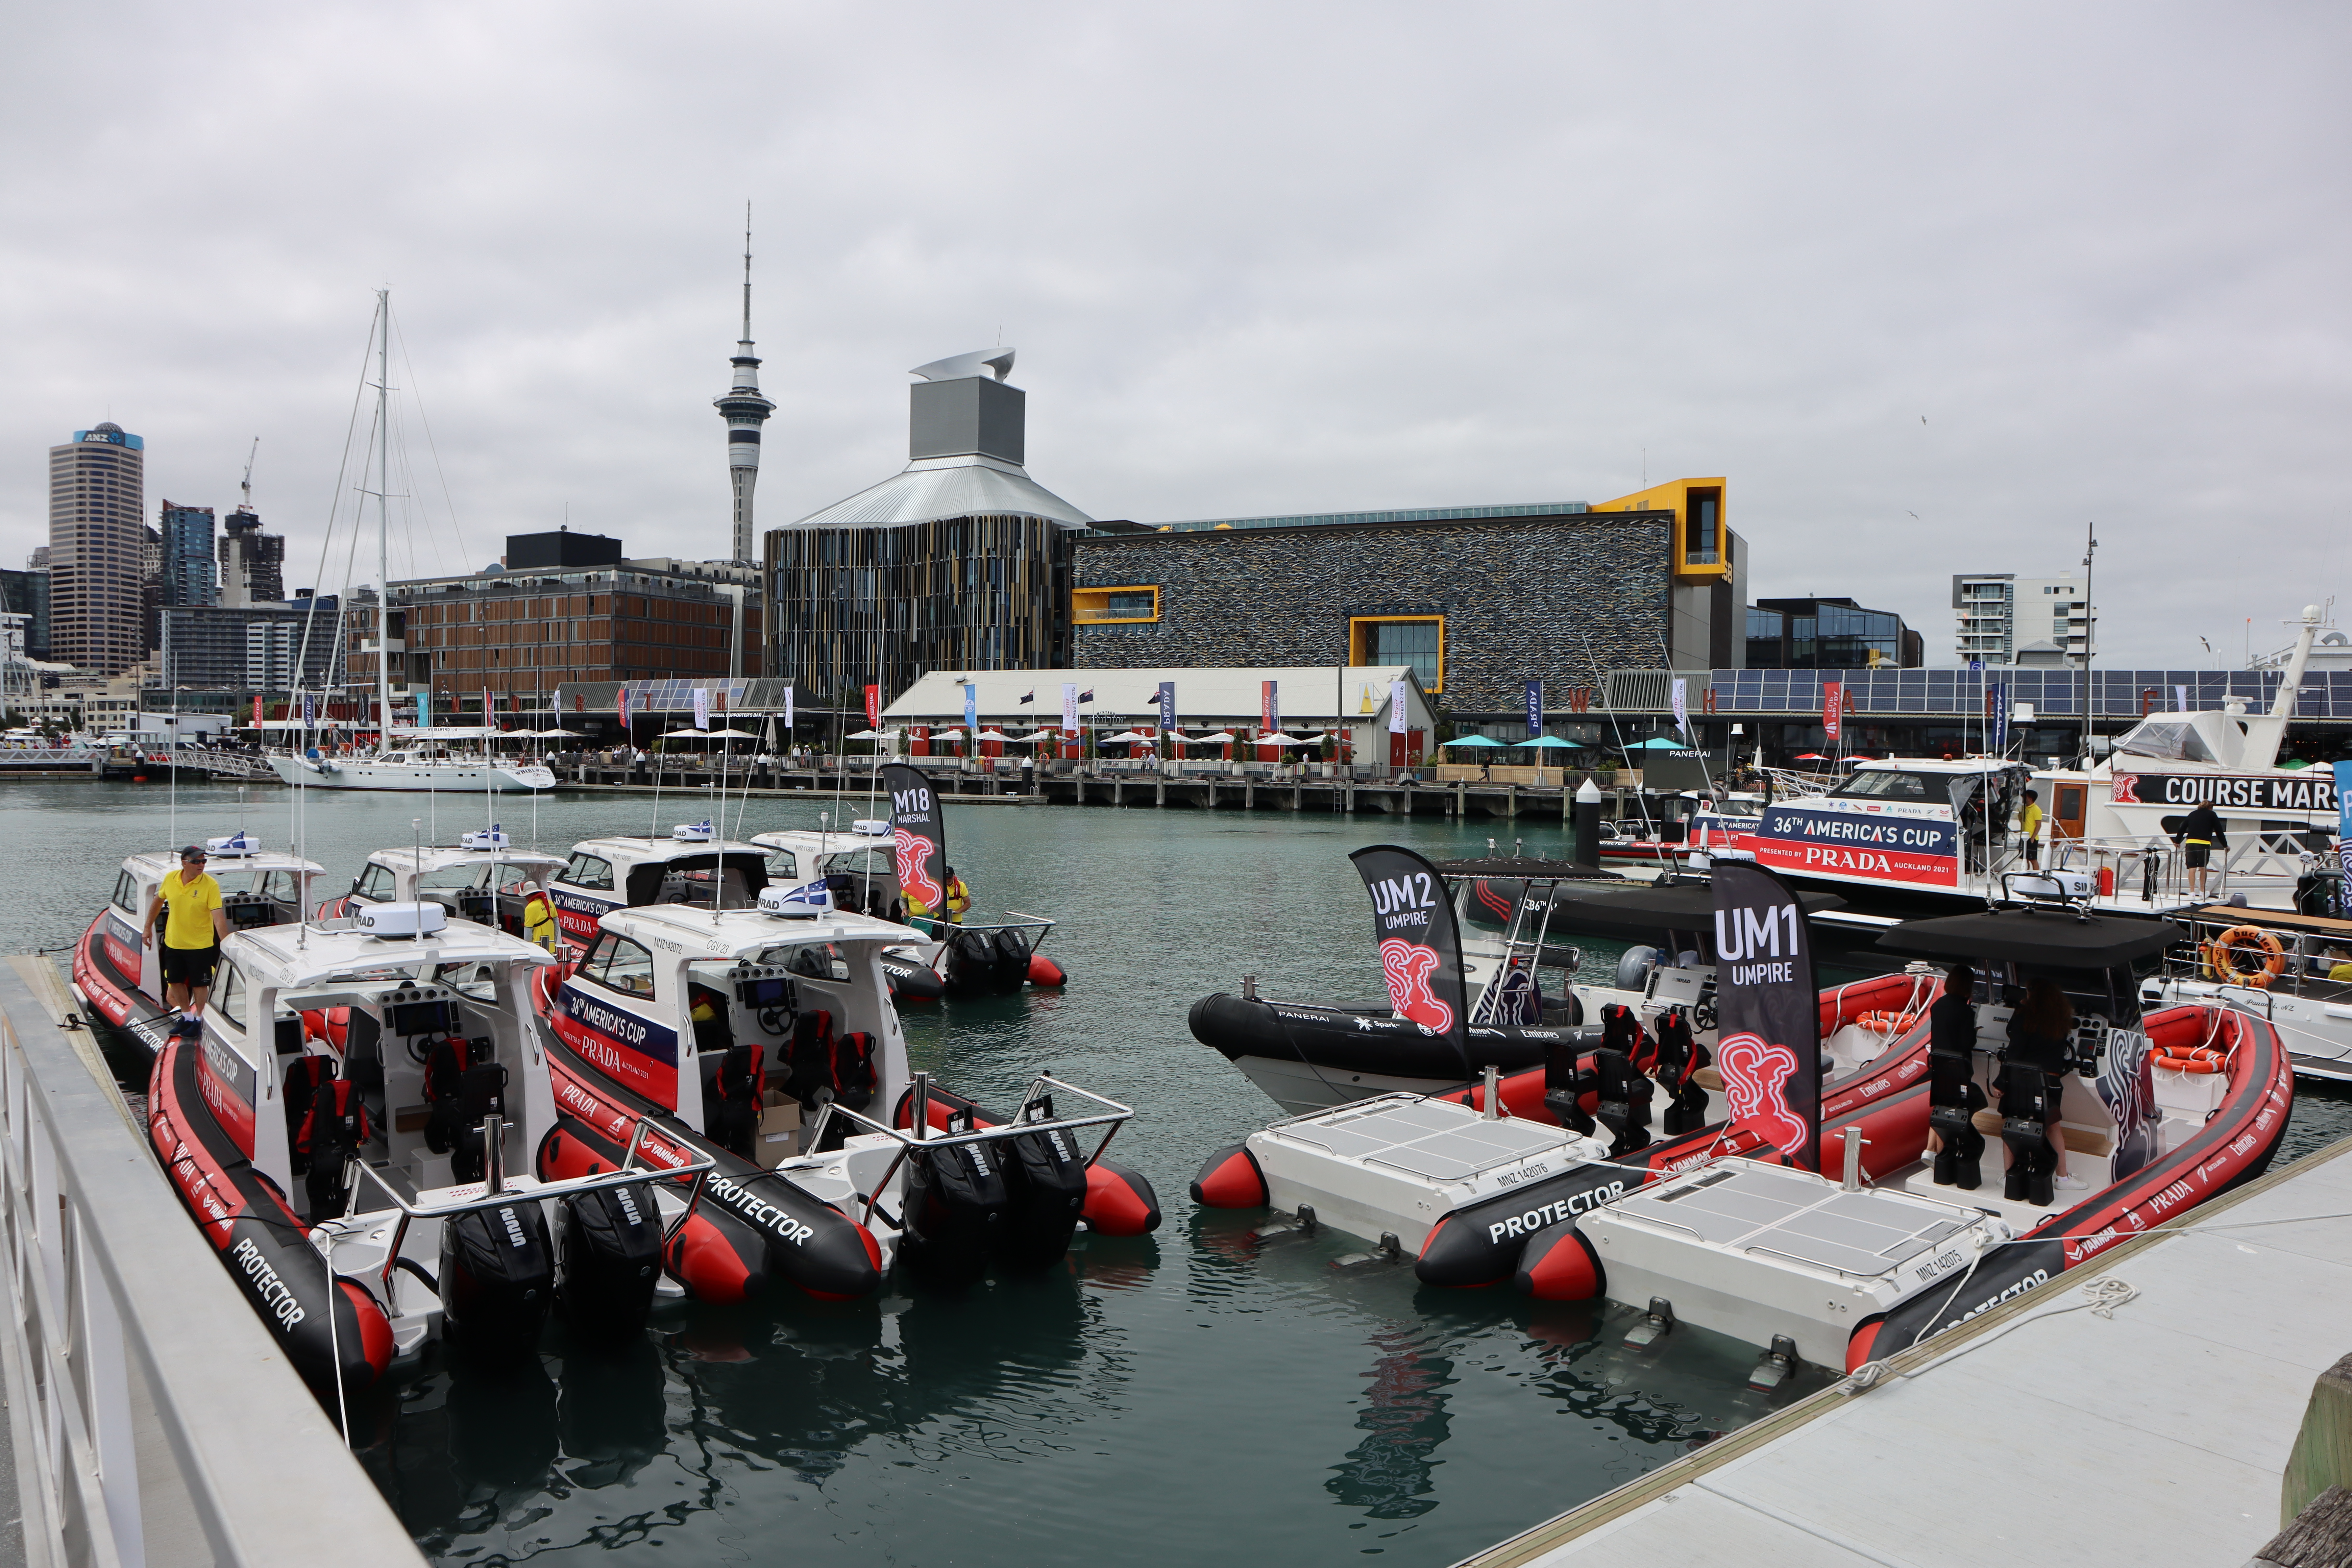 America's Cup Rayglass fleet ready for refitting